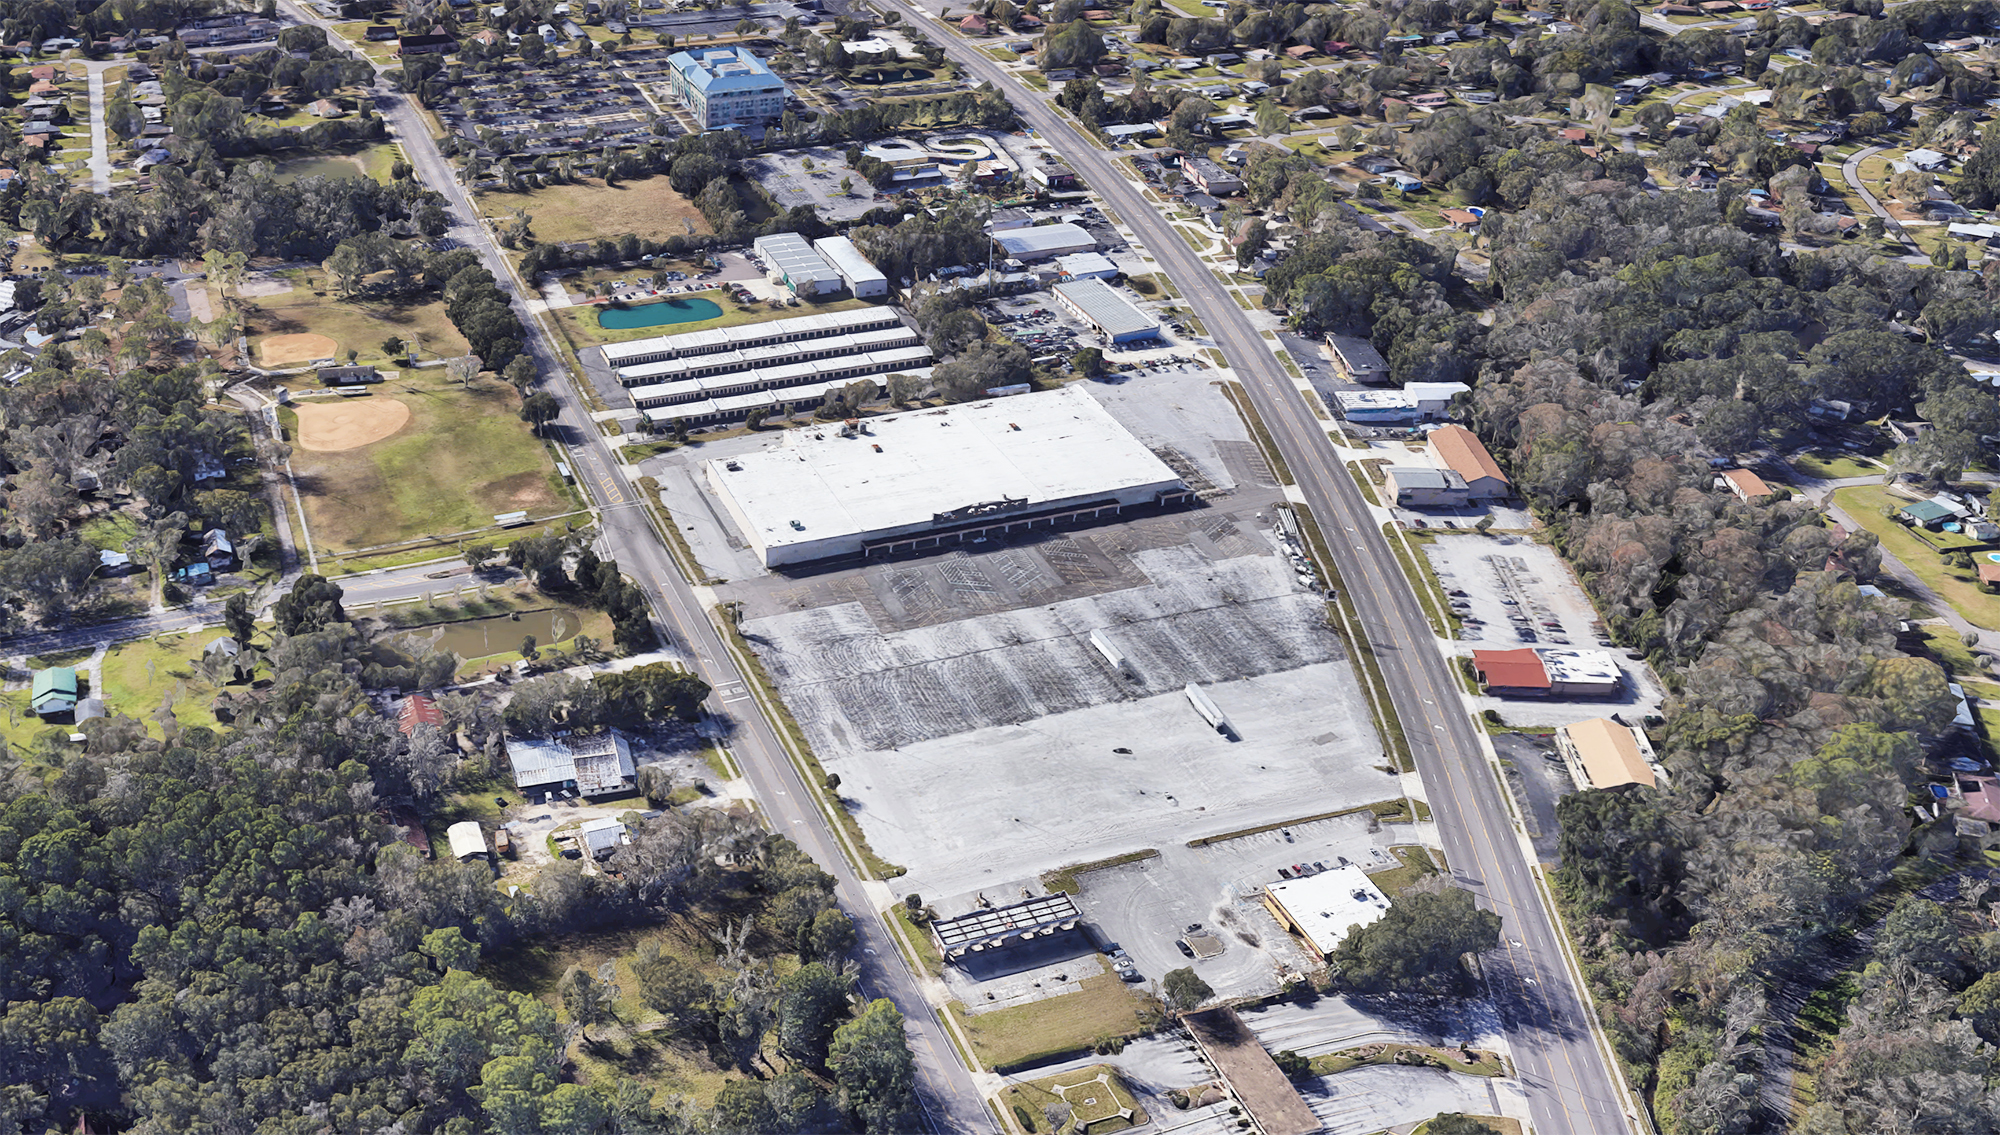 An aerial view of the former Kmart along Blanding. (Google)